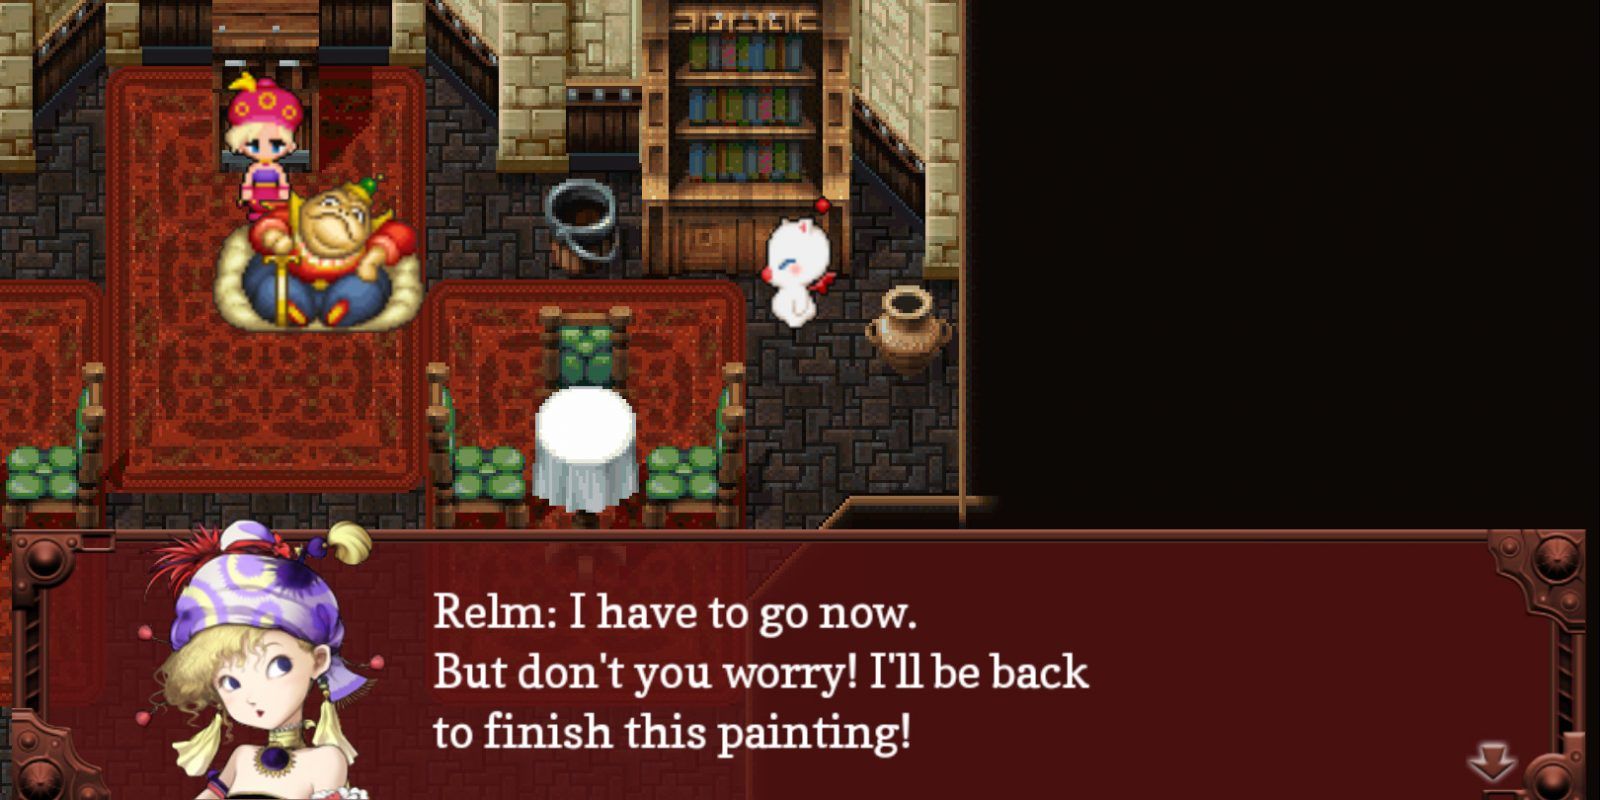 Final fantasy VI Relm leaves to join the team